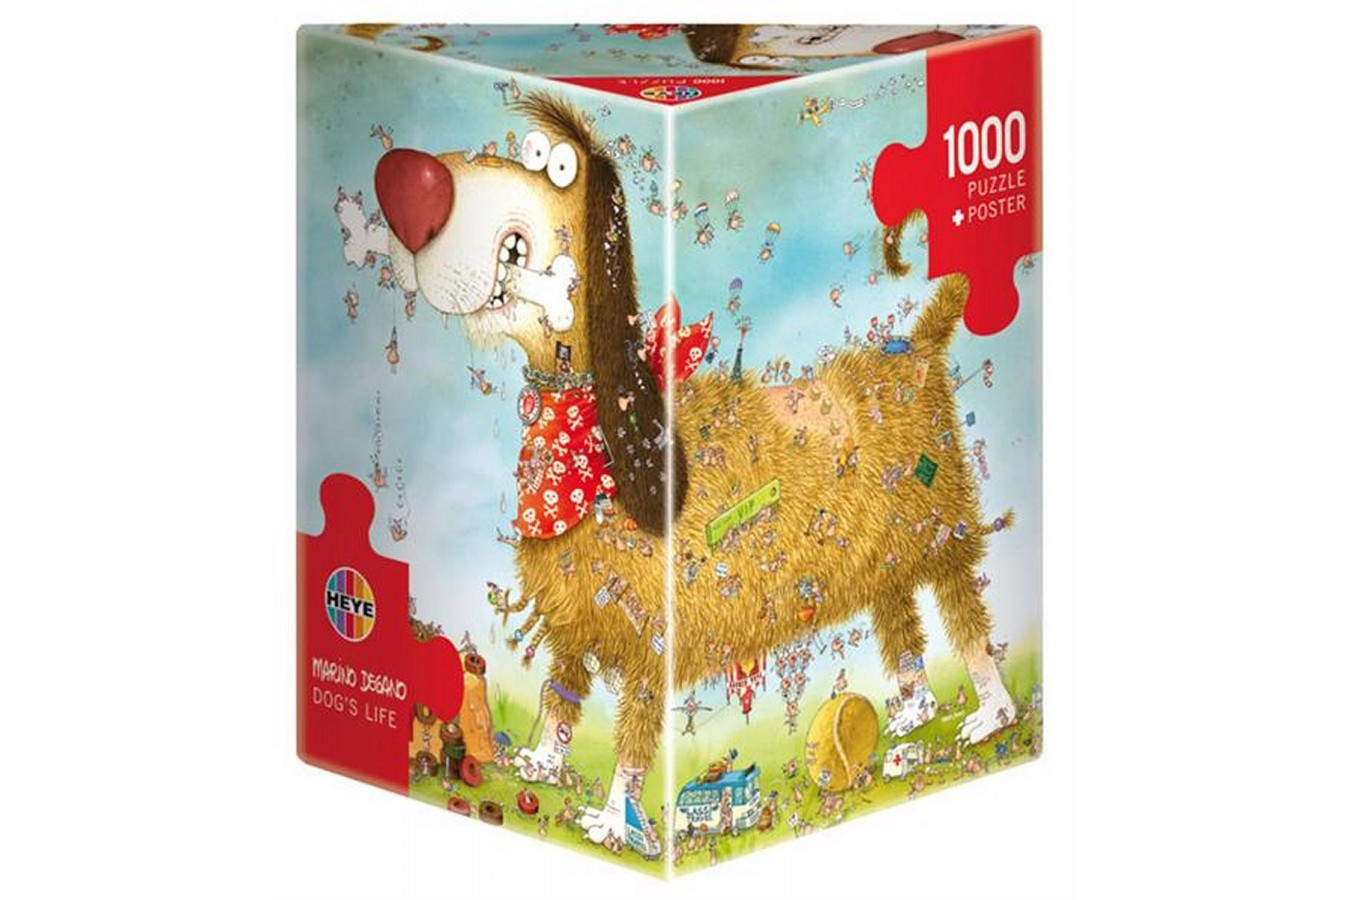 Puzzle Heye - Degano Sophie: A Dog's Life, 1000 piese (10803)